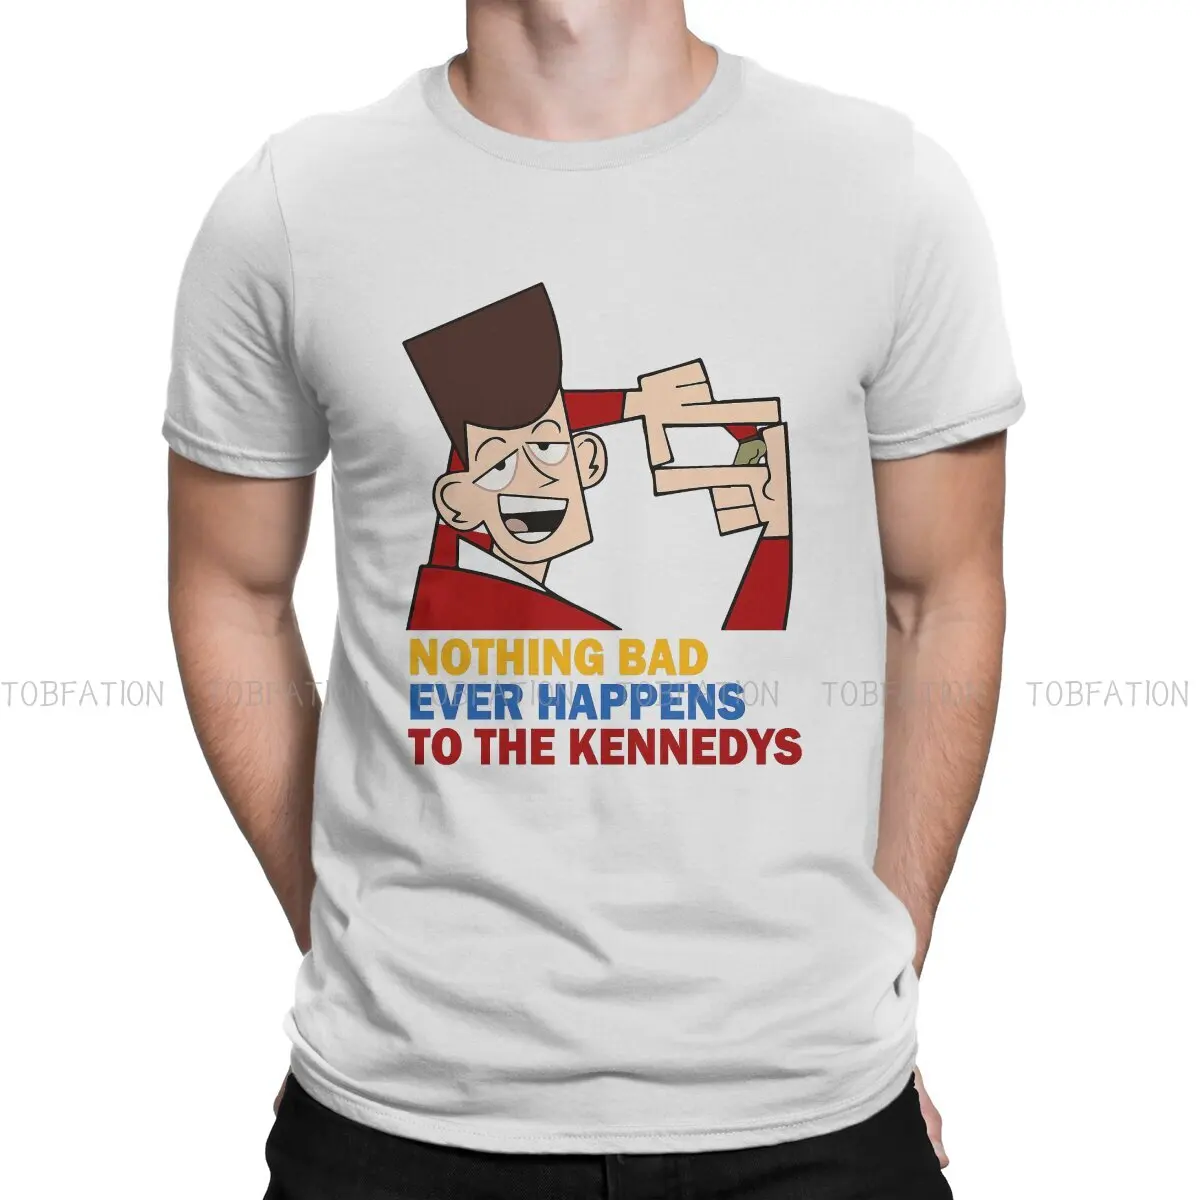 

Nothing Bad Ever Happens to the Kennedys Essential Casual TShirt Clone High Abraham Lincoln Abe Joan of Arc Printing T Shirt Men